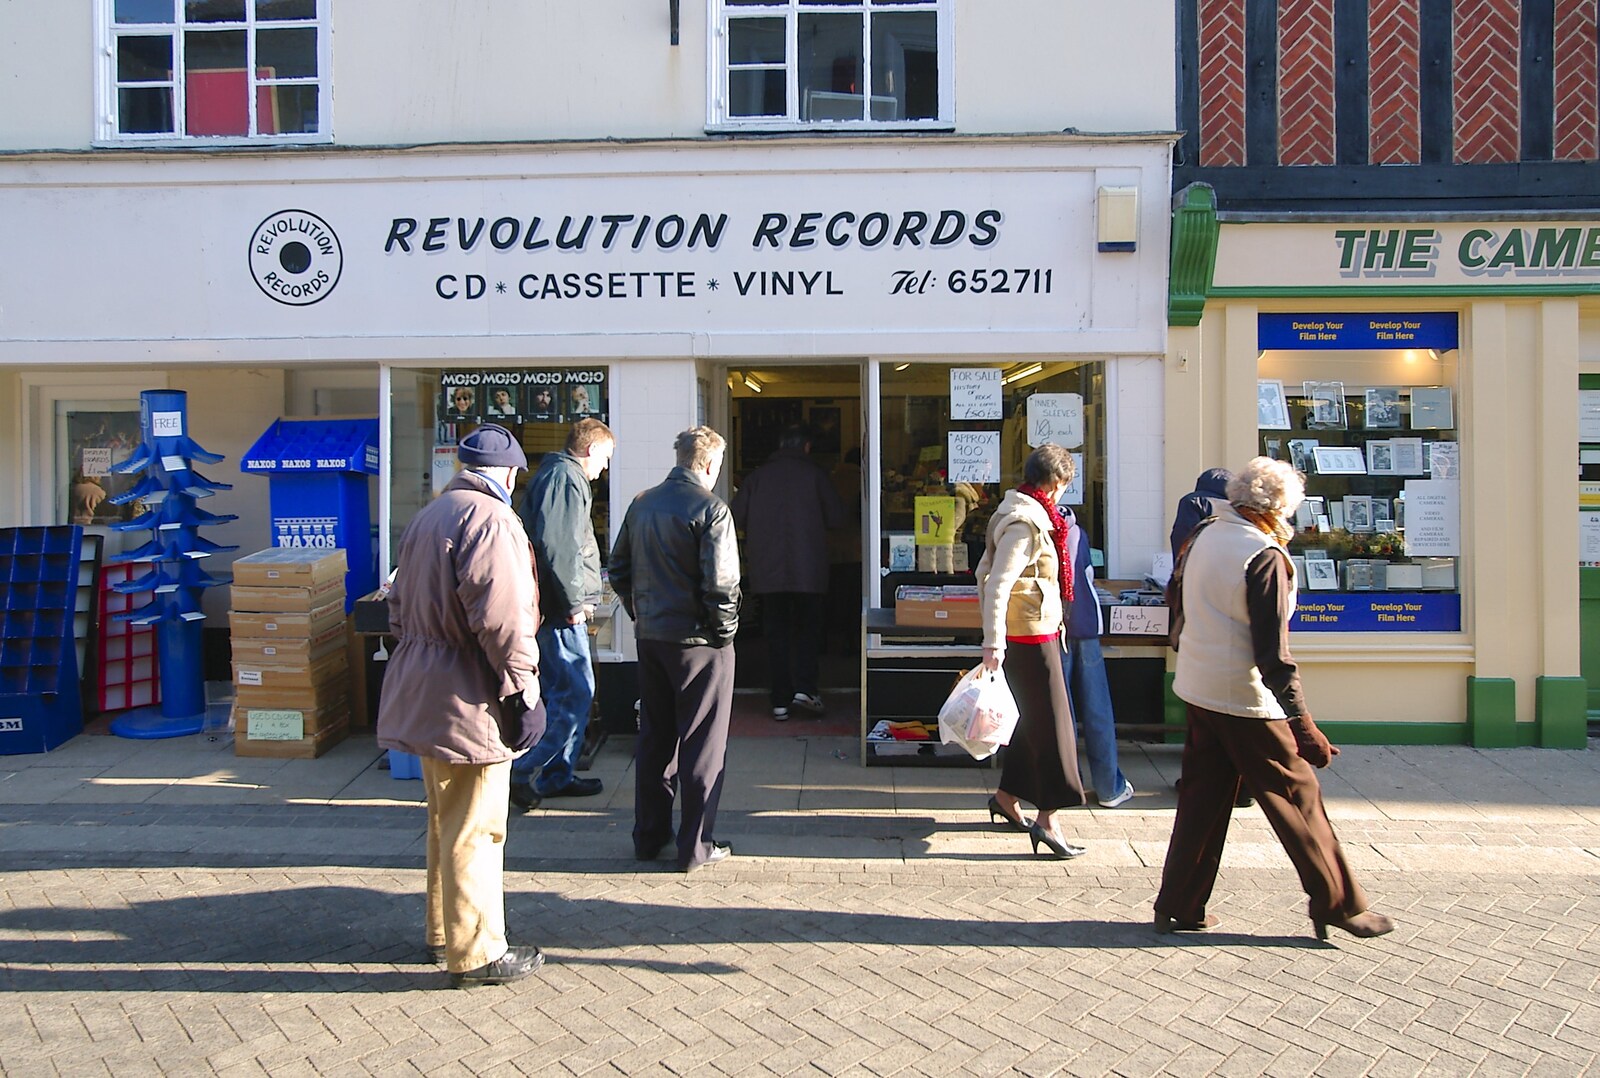 A Night in Cambridge and Revolution Records' Epilogue, Diss, Norfolk - 28th January 2006: Revolution Records' frontage on Mere Street